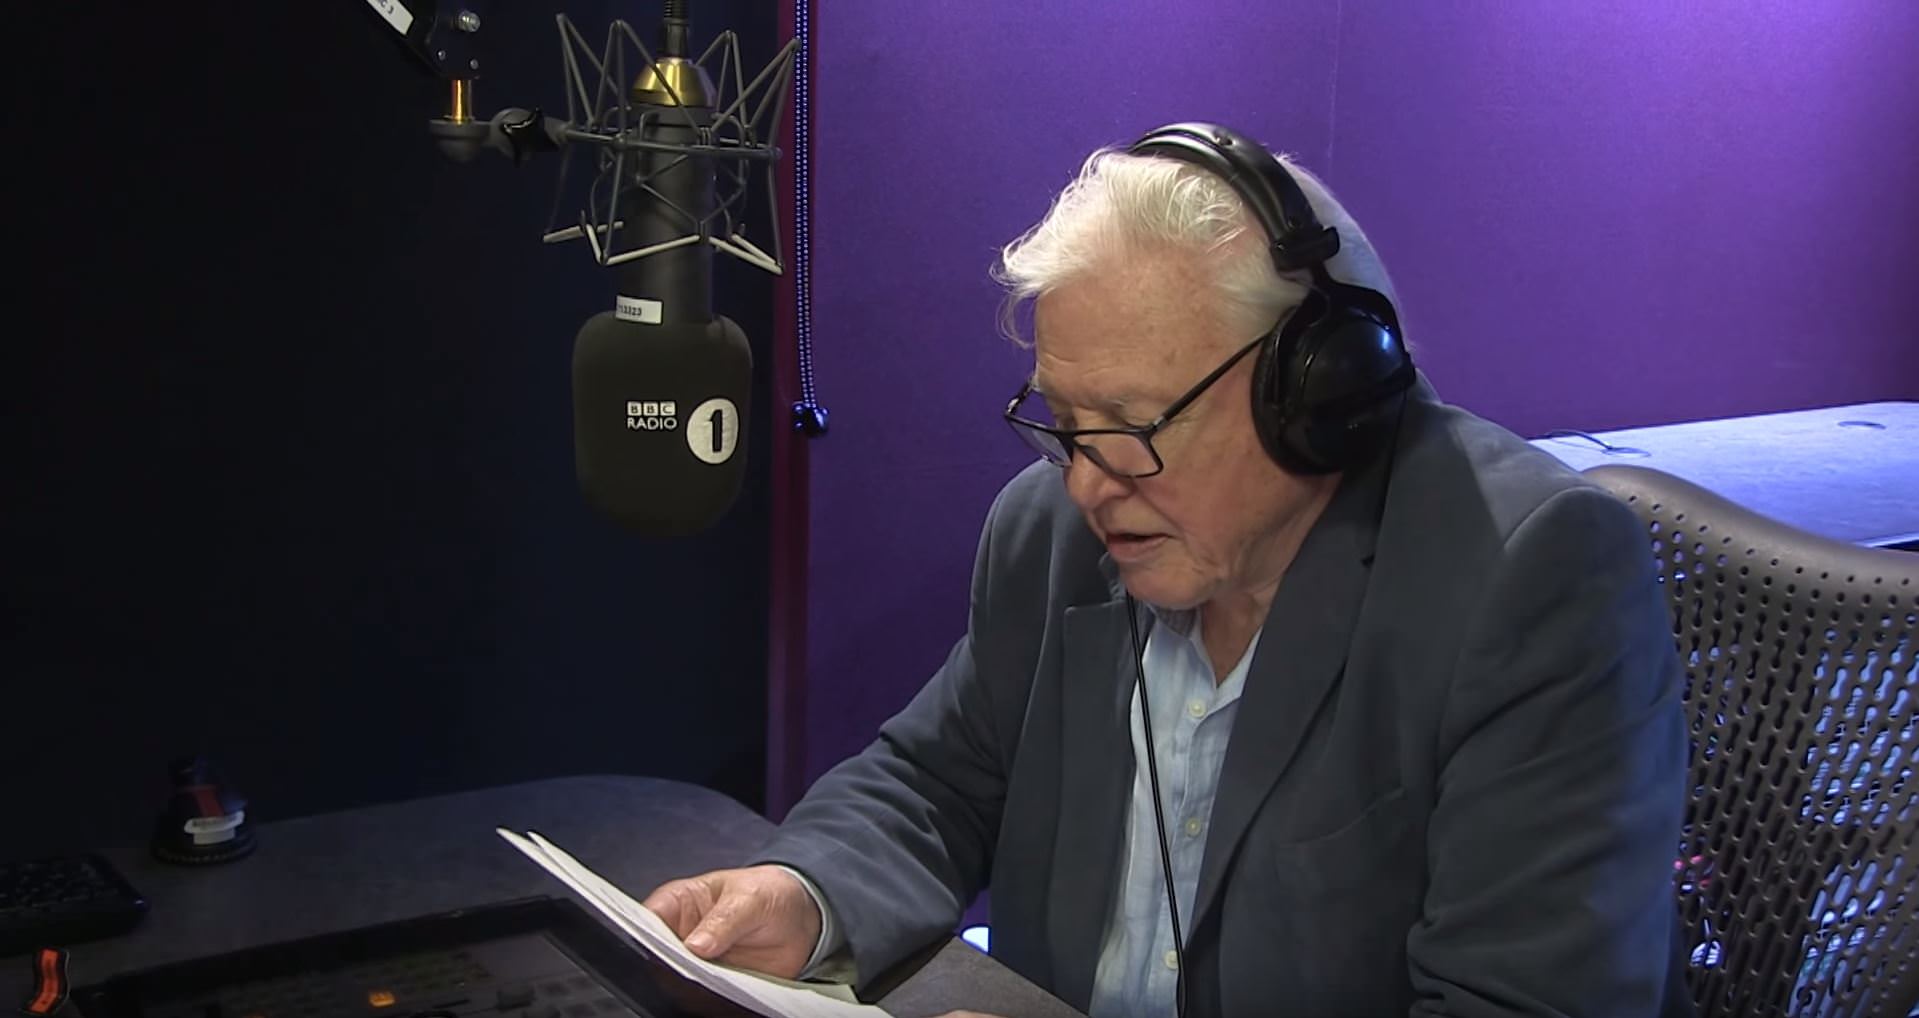 This Amazing Video of David Attenborough Narrating the Intro of Adele’s New Song ‘Hello’ Is Perfection